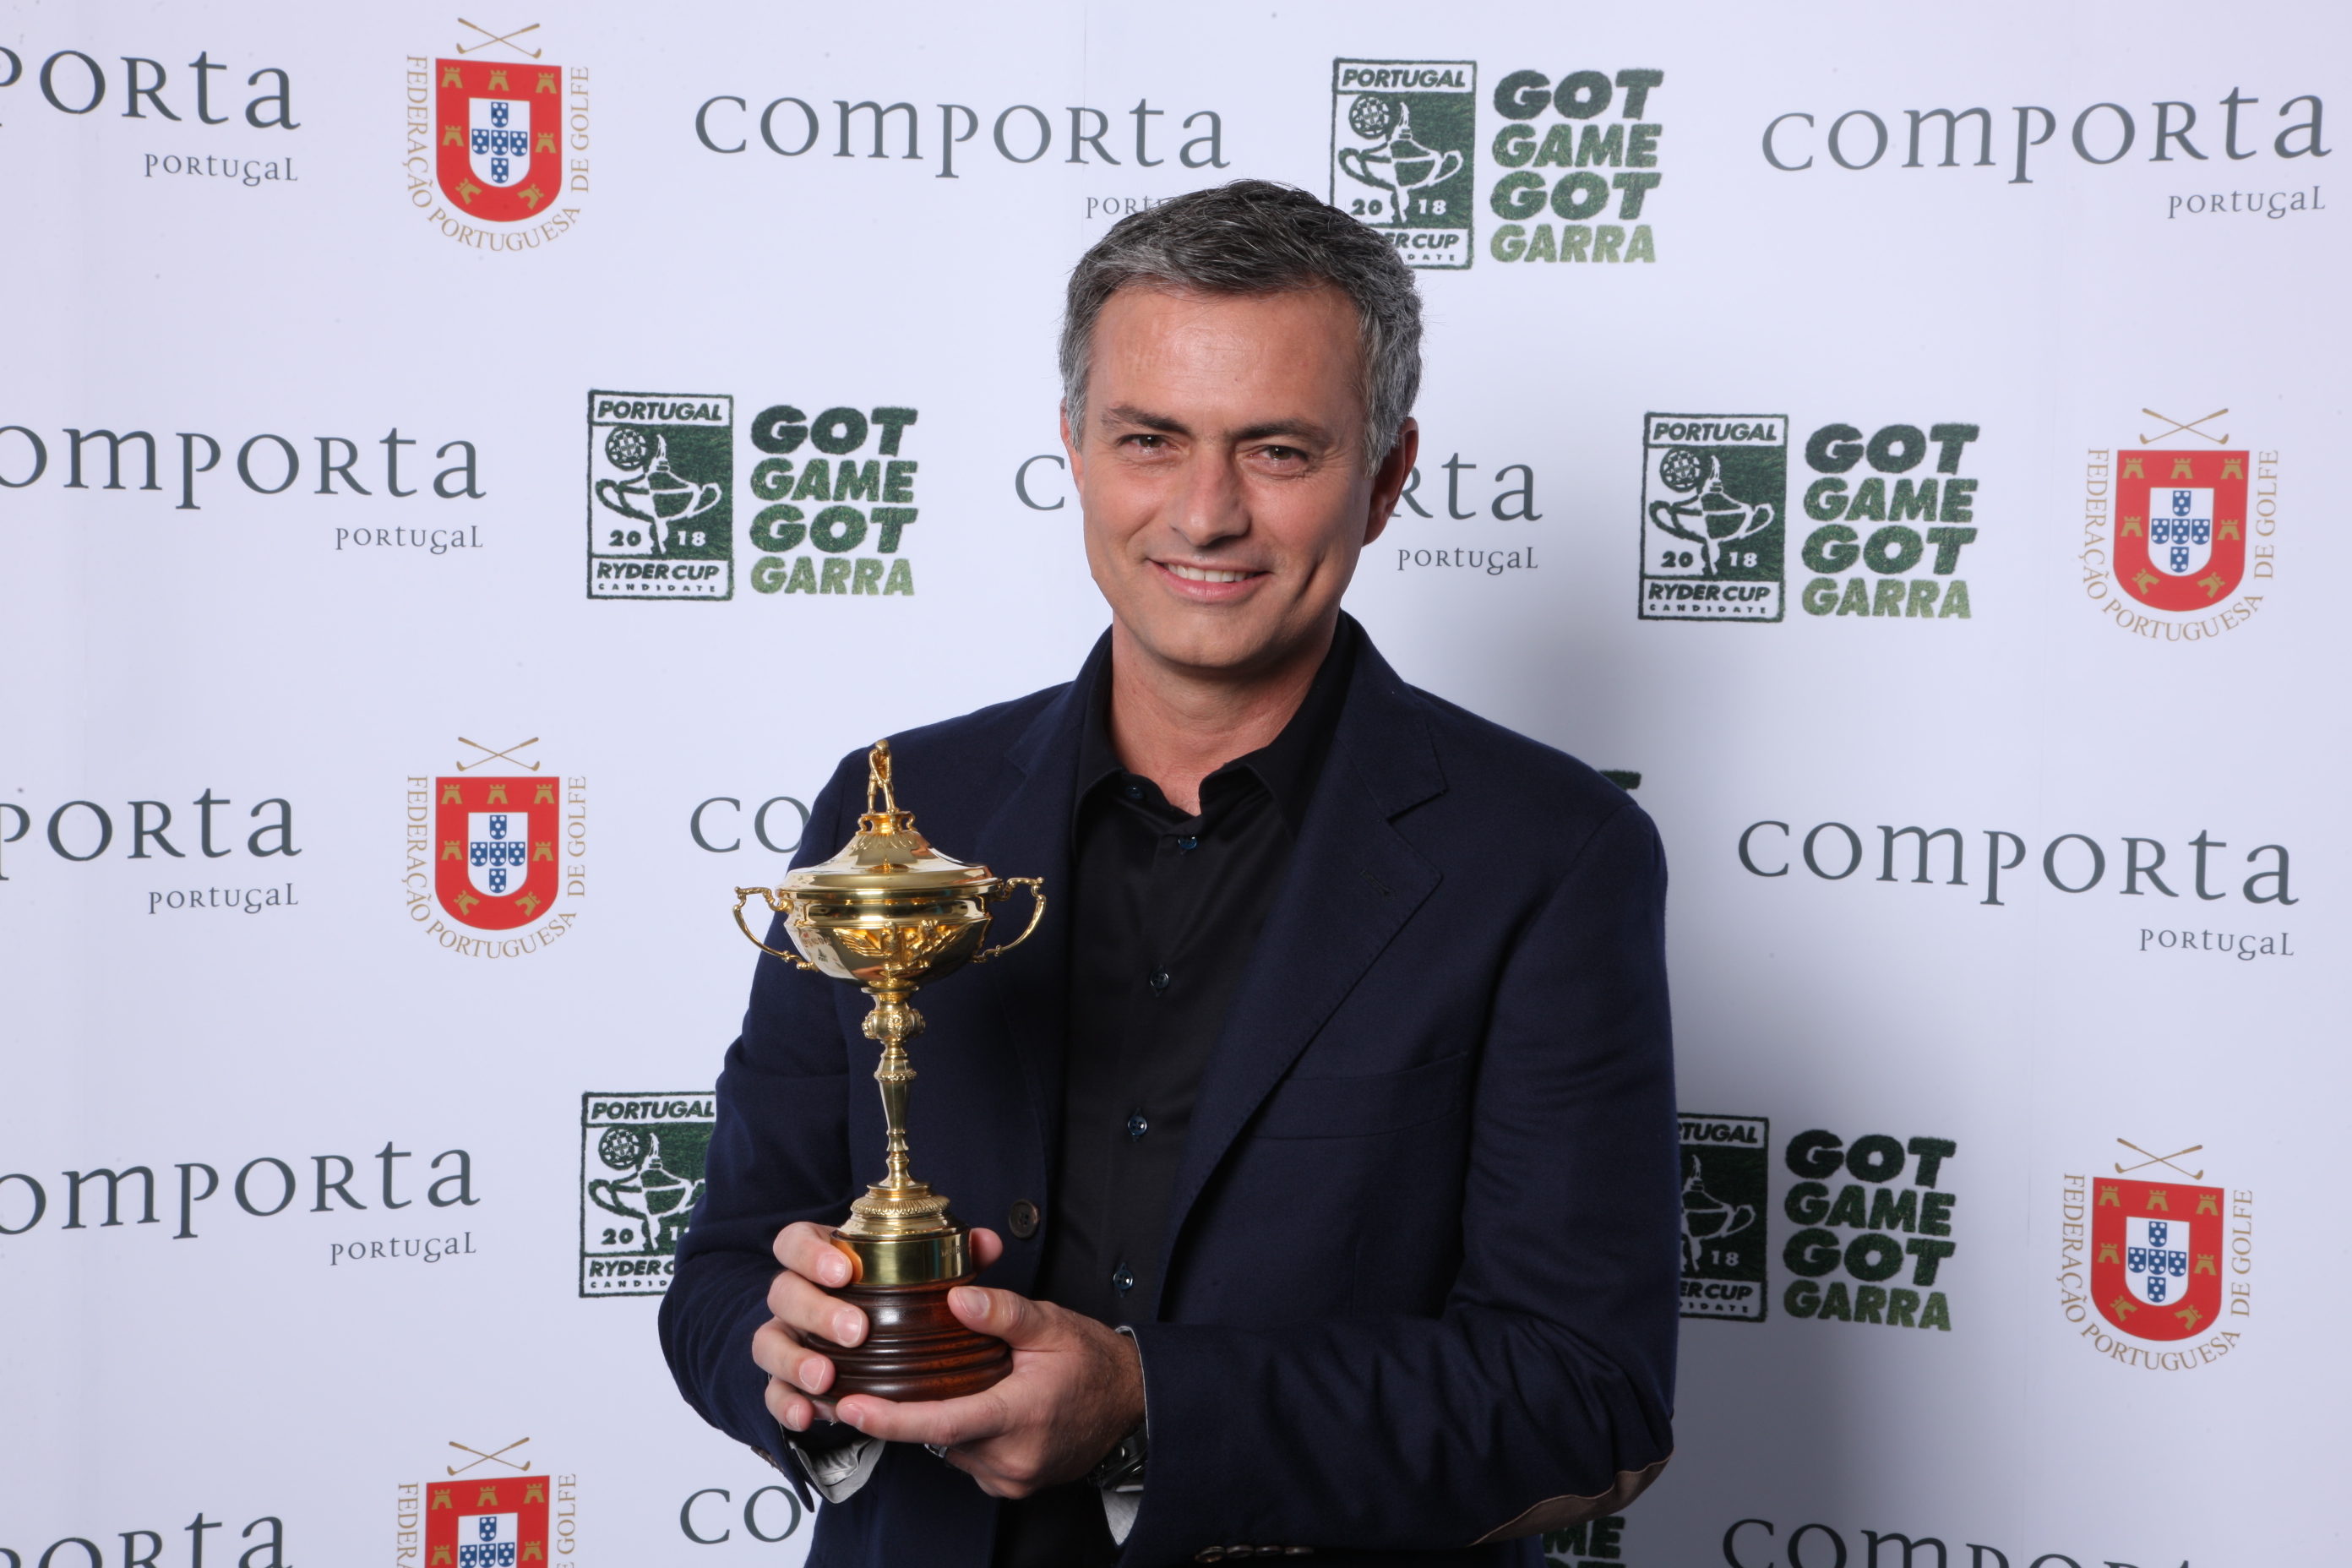 Jose_Mourinho_supporting_Portugal_2018_Ryder_Cup_bid